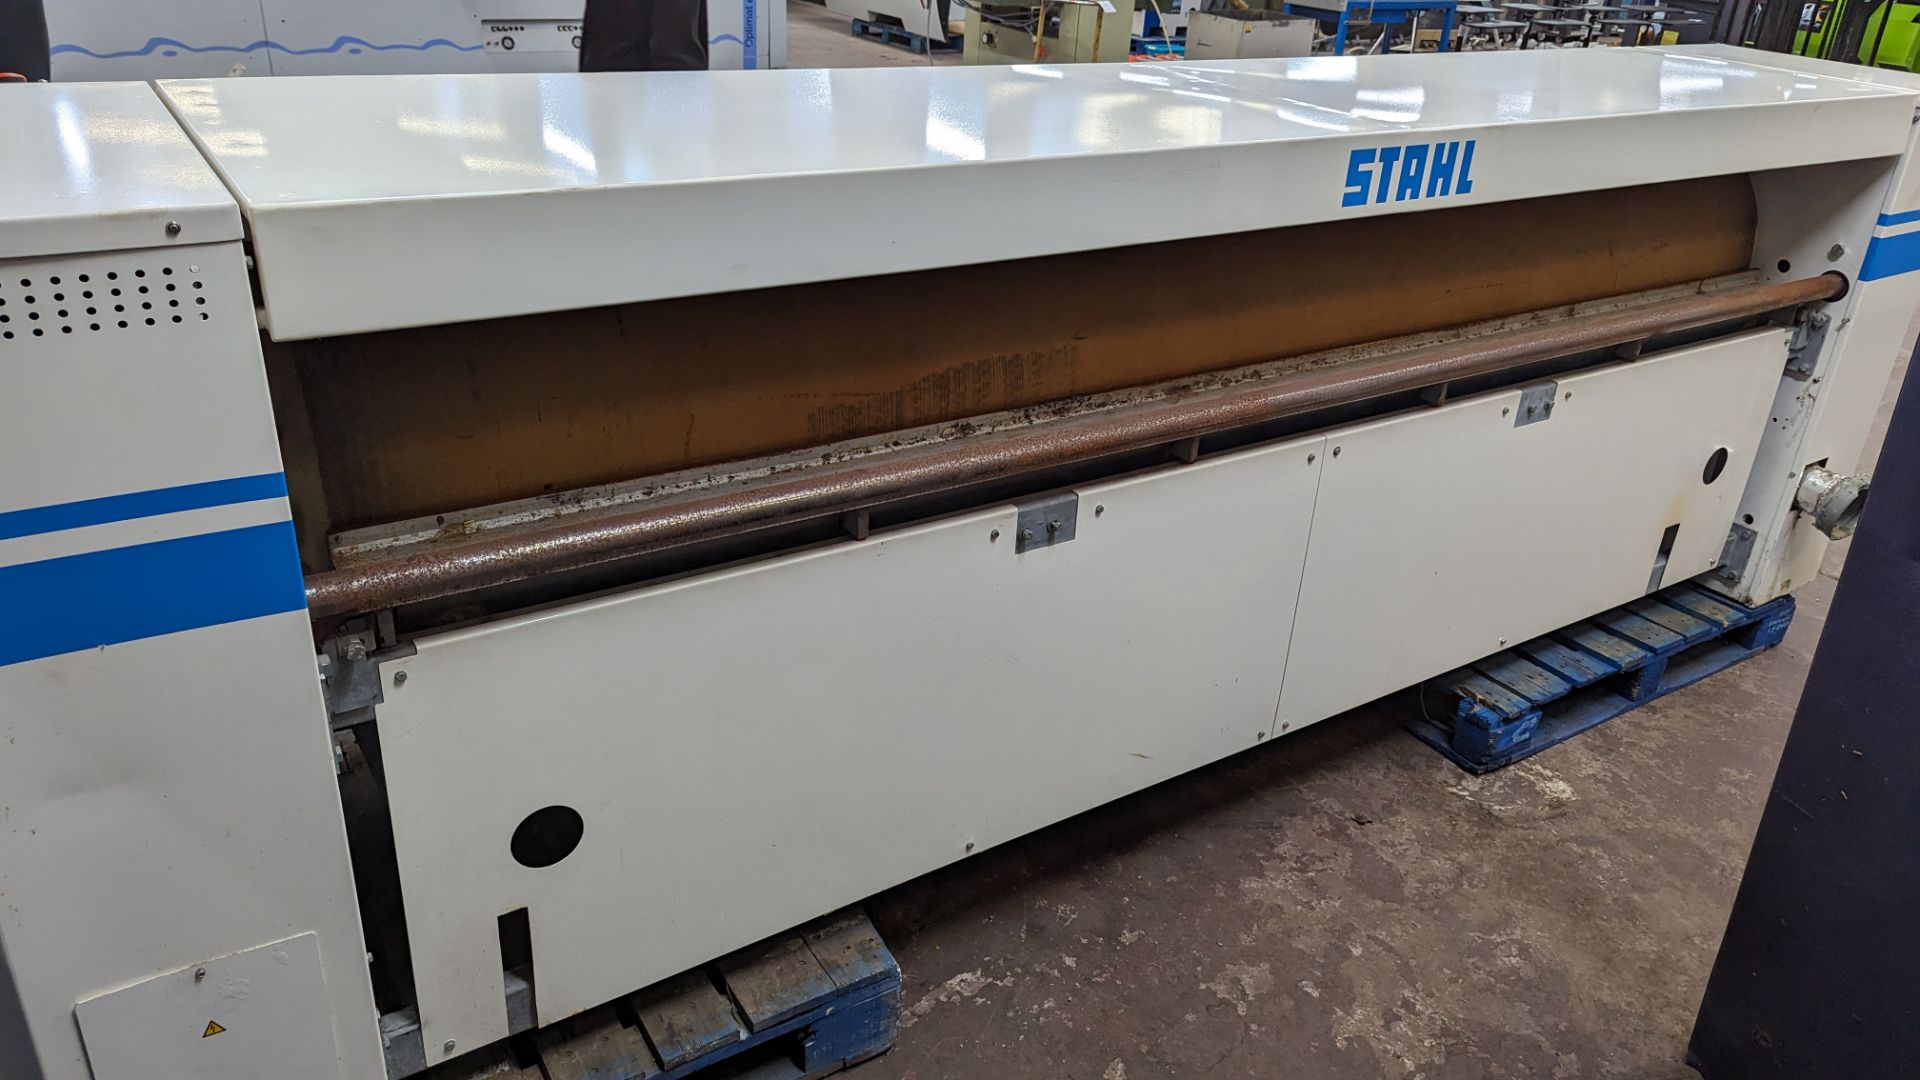 2017 Stahl flatwork ironer Super Chest ironing system, type MC 600/3000 D - Image 7 of 20